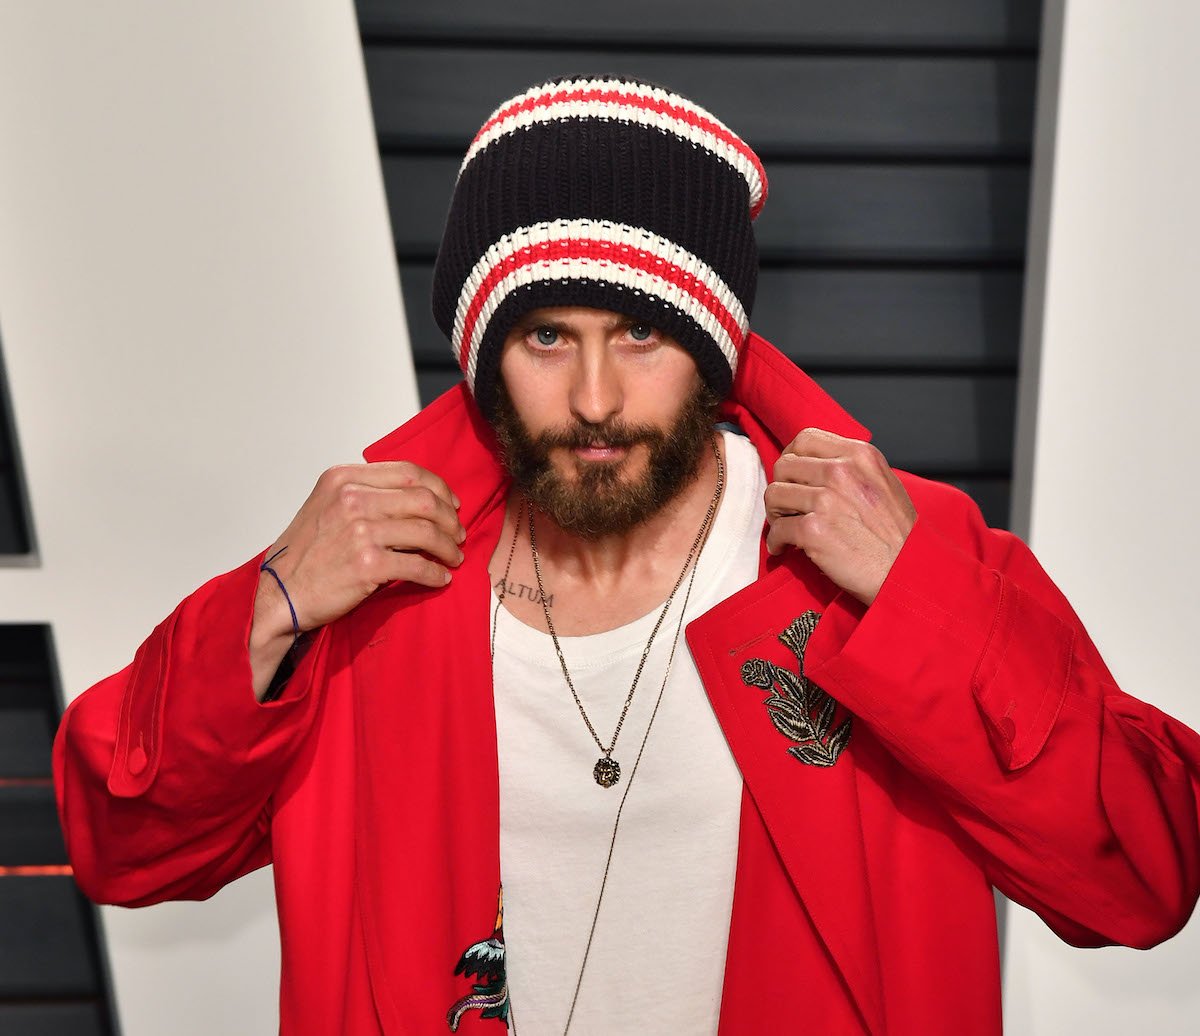 Jared Leto poses in a hat and red jacket